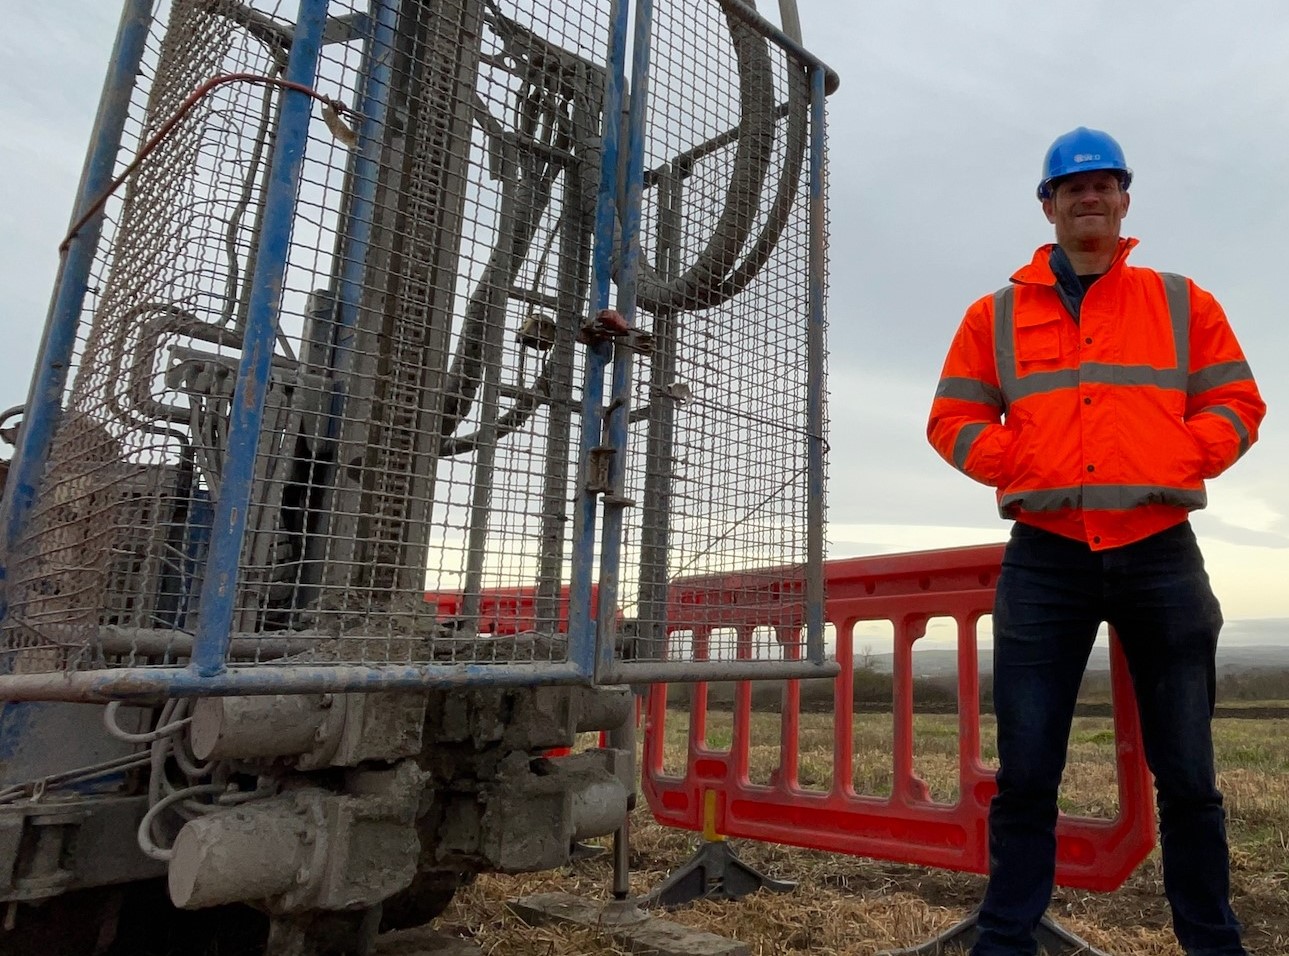 Chris Rudd sees growth for RWO’s geotechnical department as the company expands its operations on the back of the Wardley Colliery work